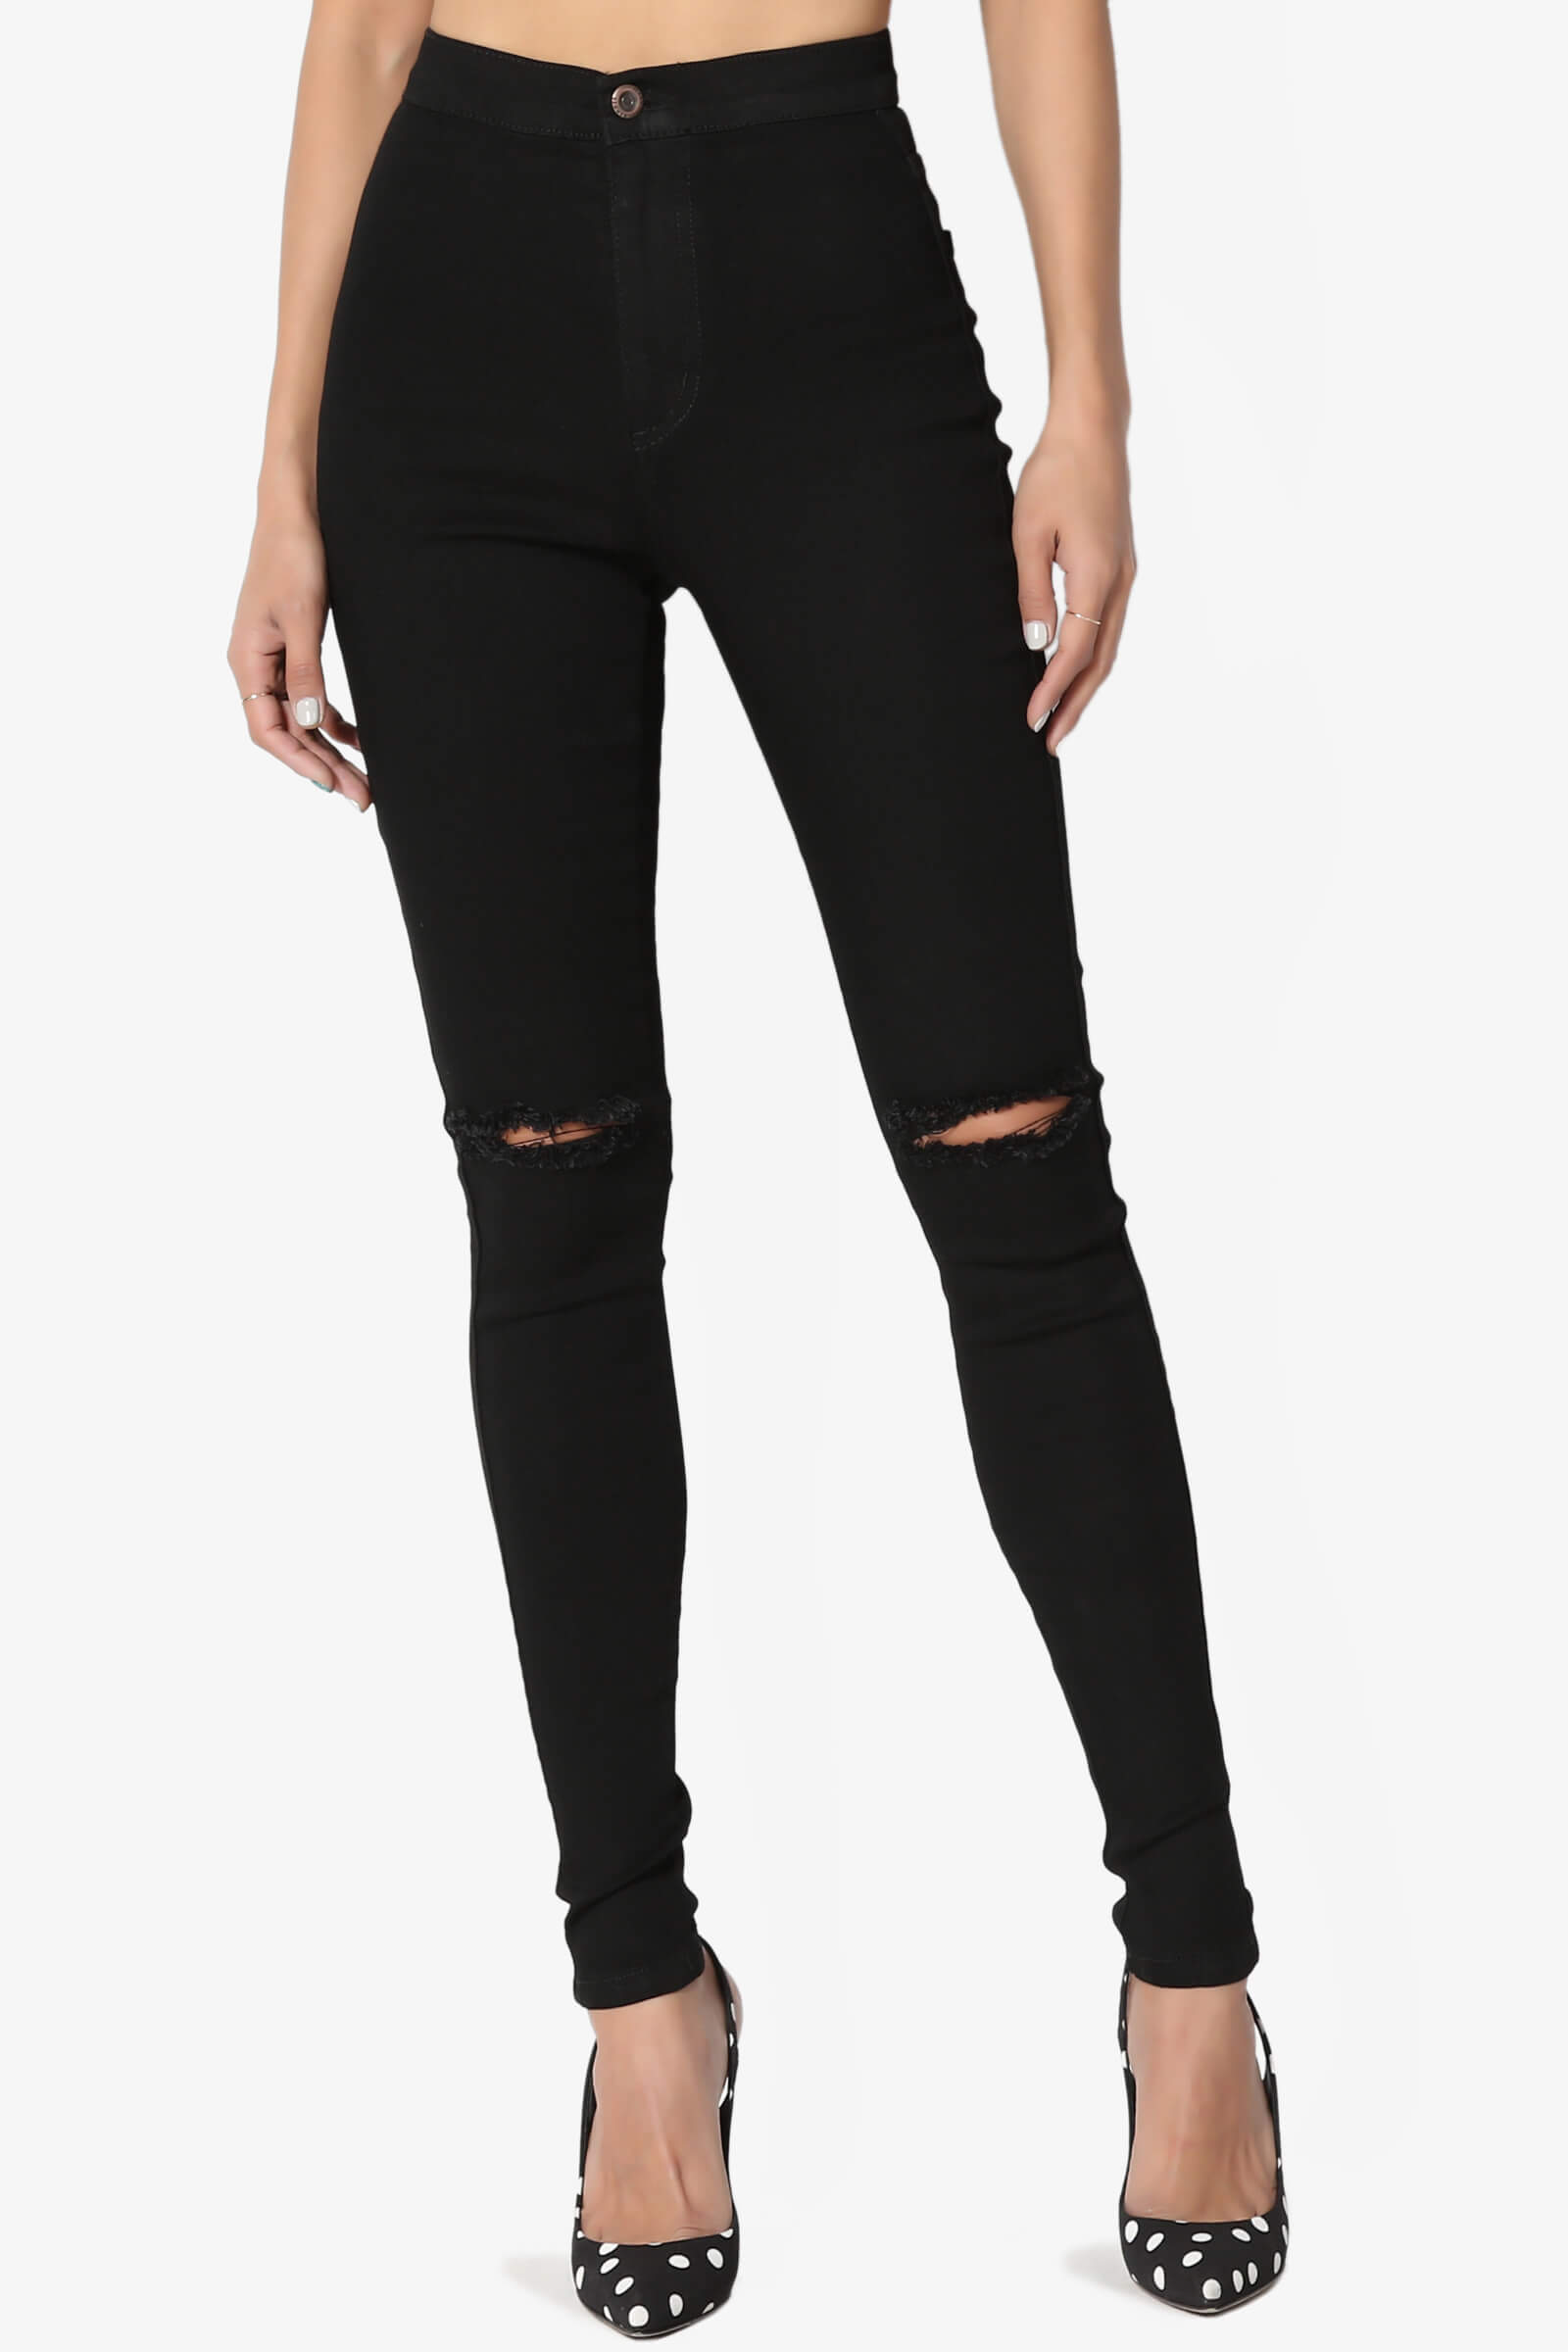 TheMogan Women's High Waisted Ripped Distressed Destroyed Skinny Jeans ...